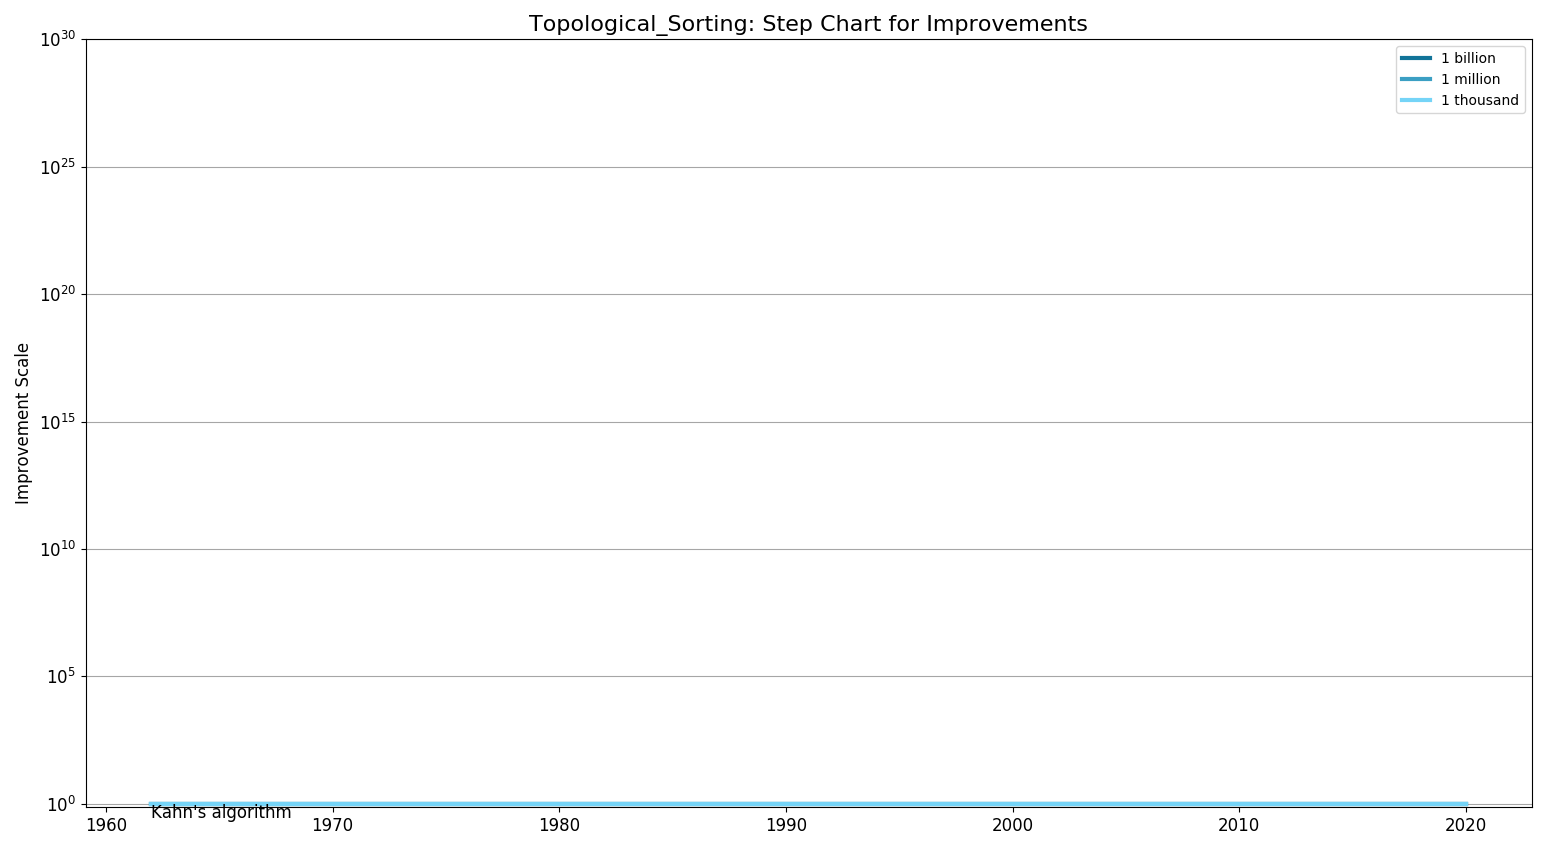 Topological SortingStepChart.png